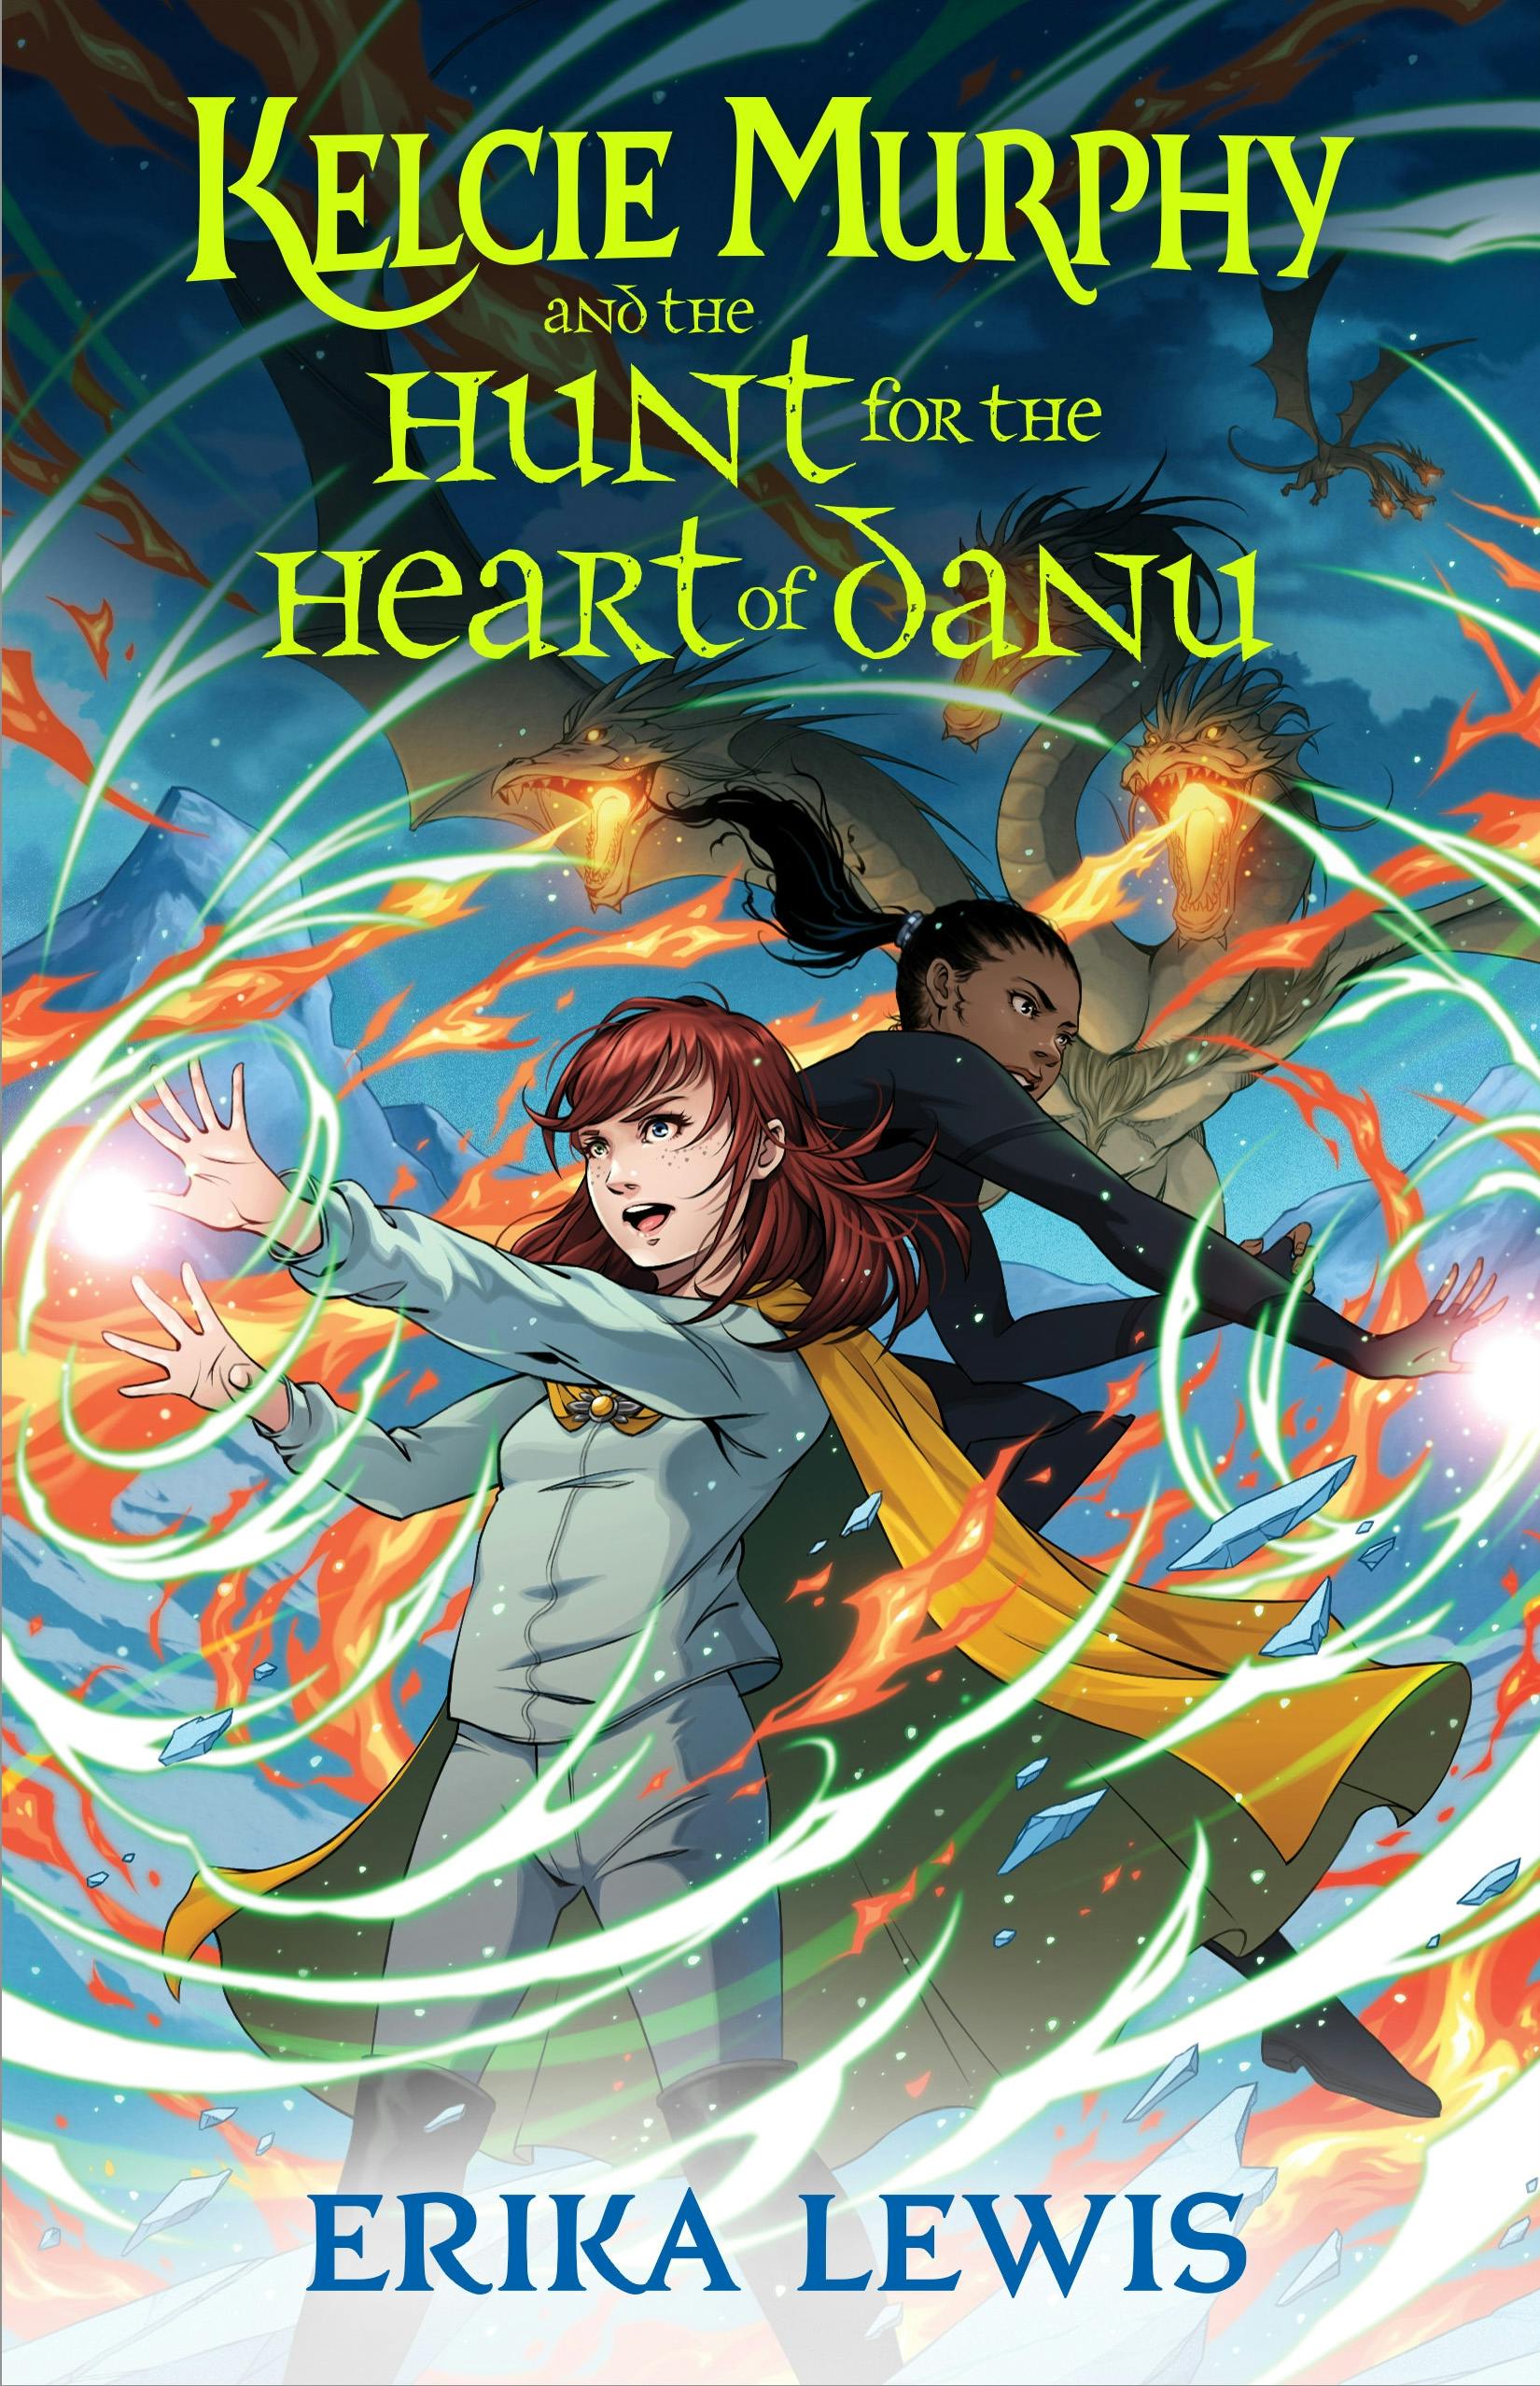 Image of Kelcie Murphy and the Hunt for the Heart of Danu